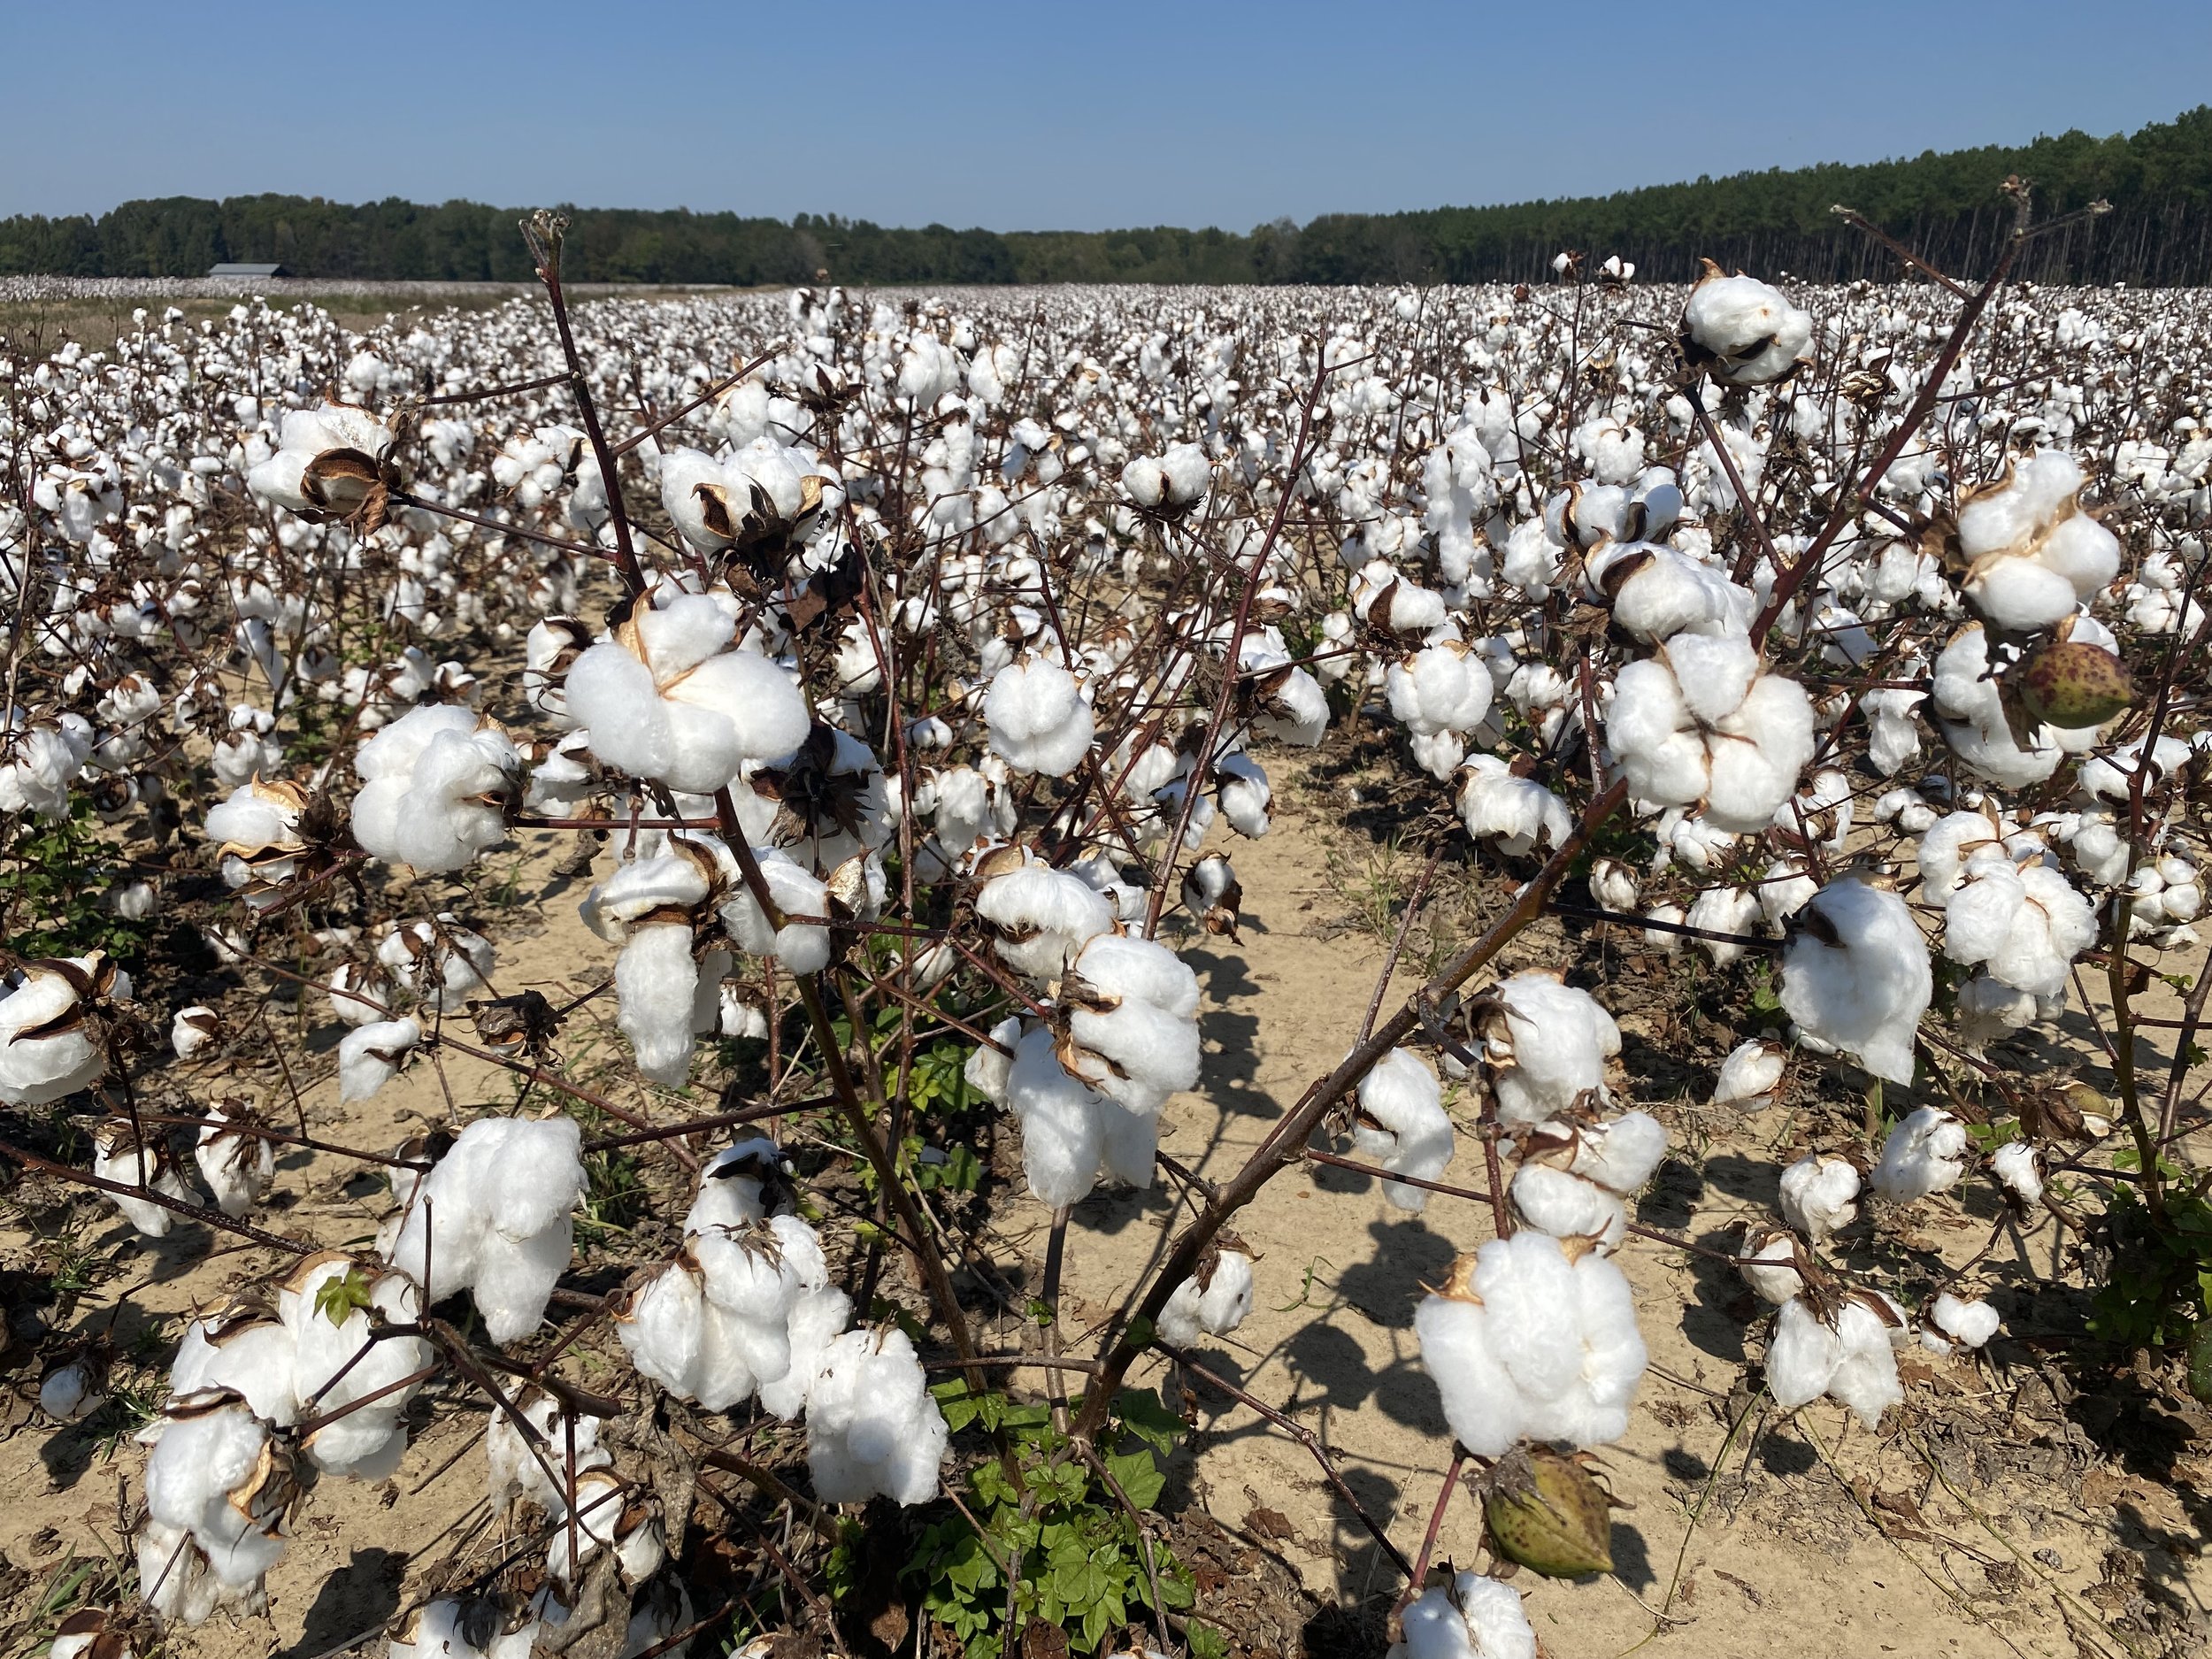  A Mississippi cotton field “white for the harvest.” 